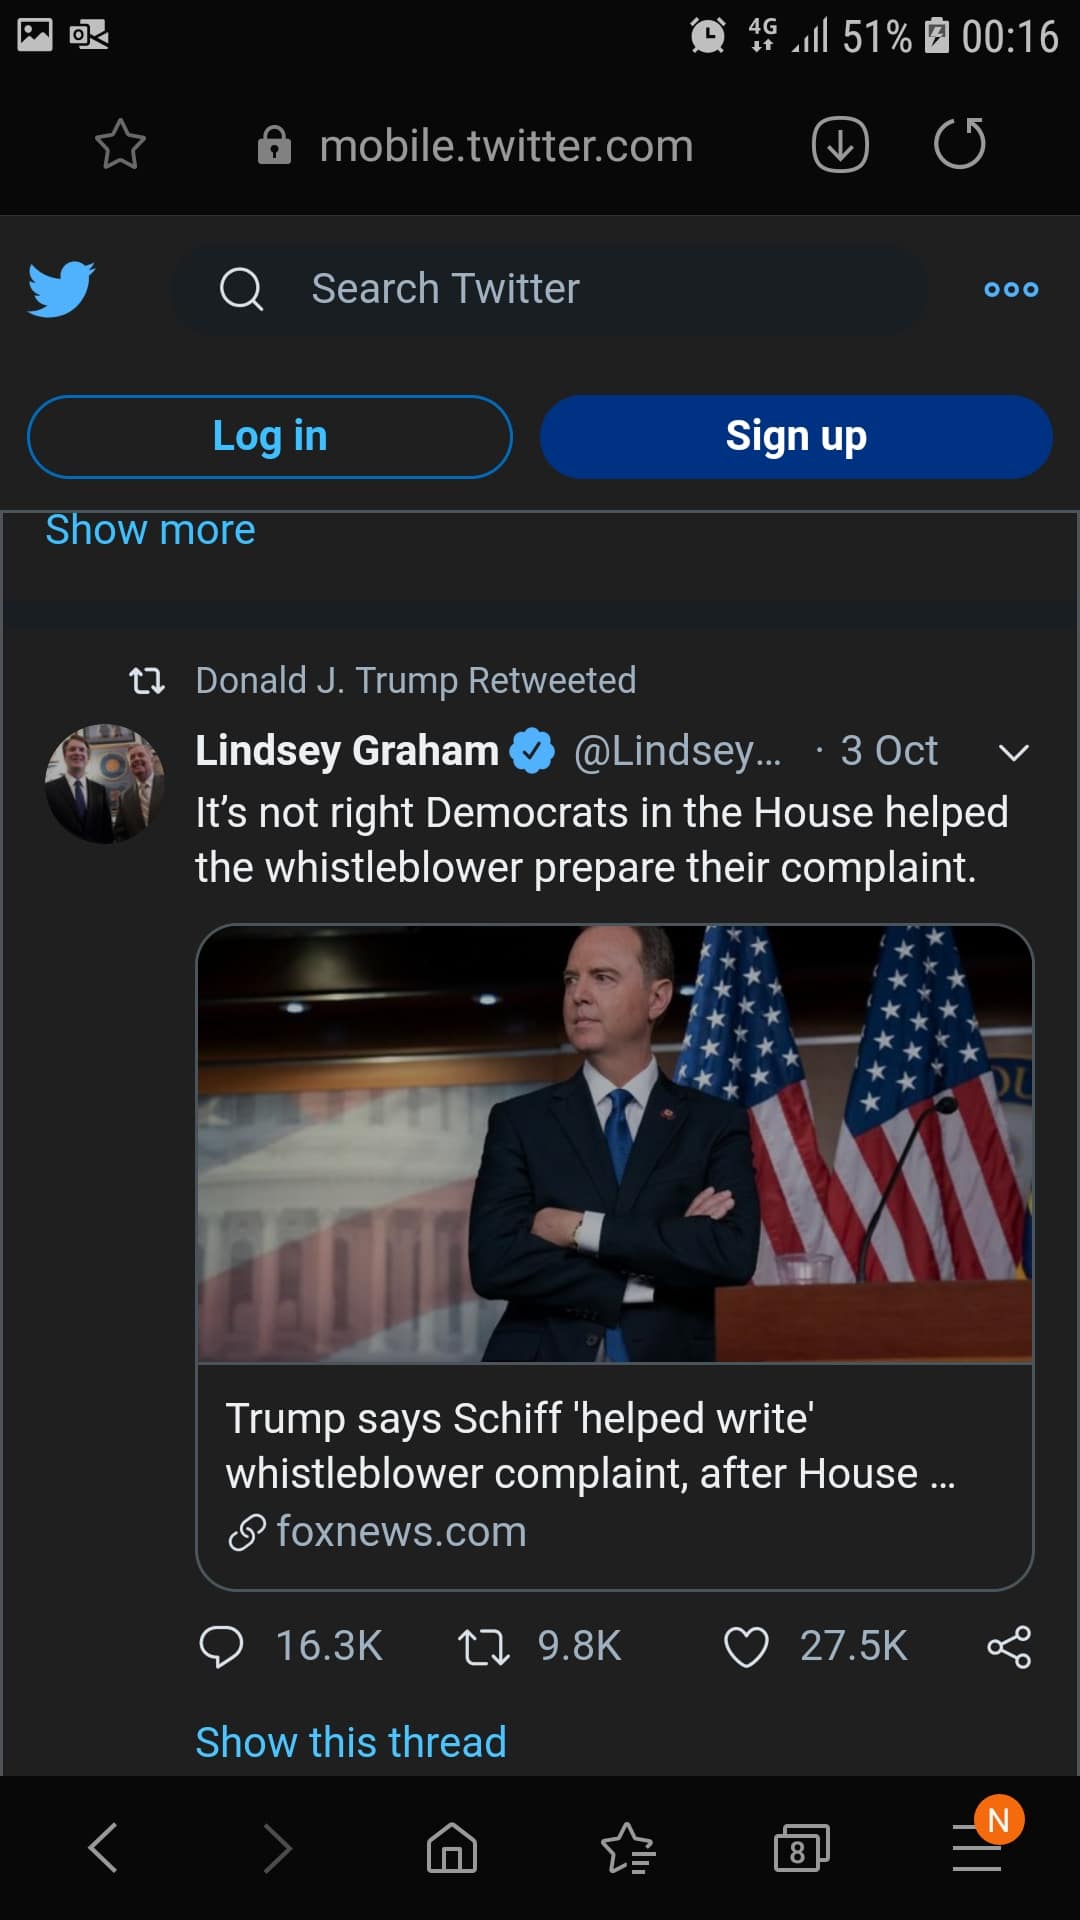 political political-memes political text: A a 00:16 a mobile.twitter.com Q Search Twitter Log in S ow more Donald J. Trump Retweeted 000 Sign up @Lindsey... Lindsey Graham • 3 Oct v It's not right Democrats in the House helped the whistleblower prepare their complaint. Trump says Schiff 'helped write' whistleblower complaint, after House ... (9 foxnews.com 0 16.3K 9.8K Show this thread 0 27.5K < 